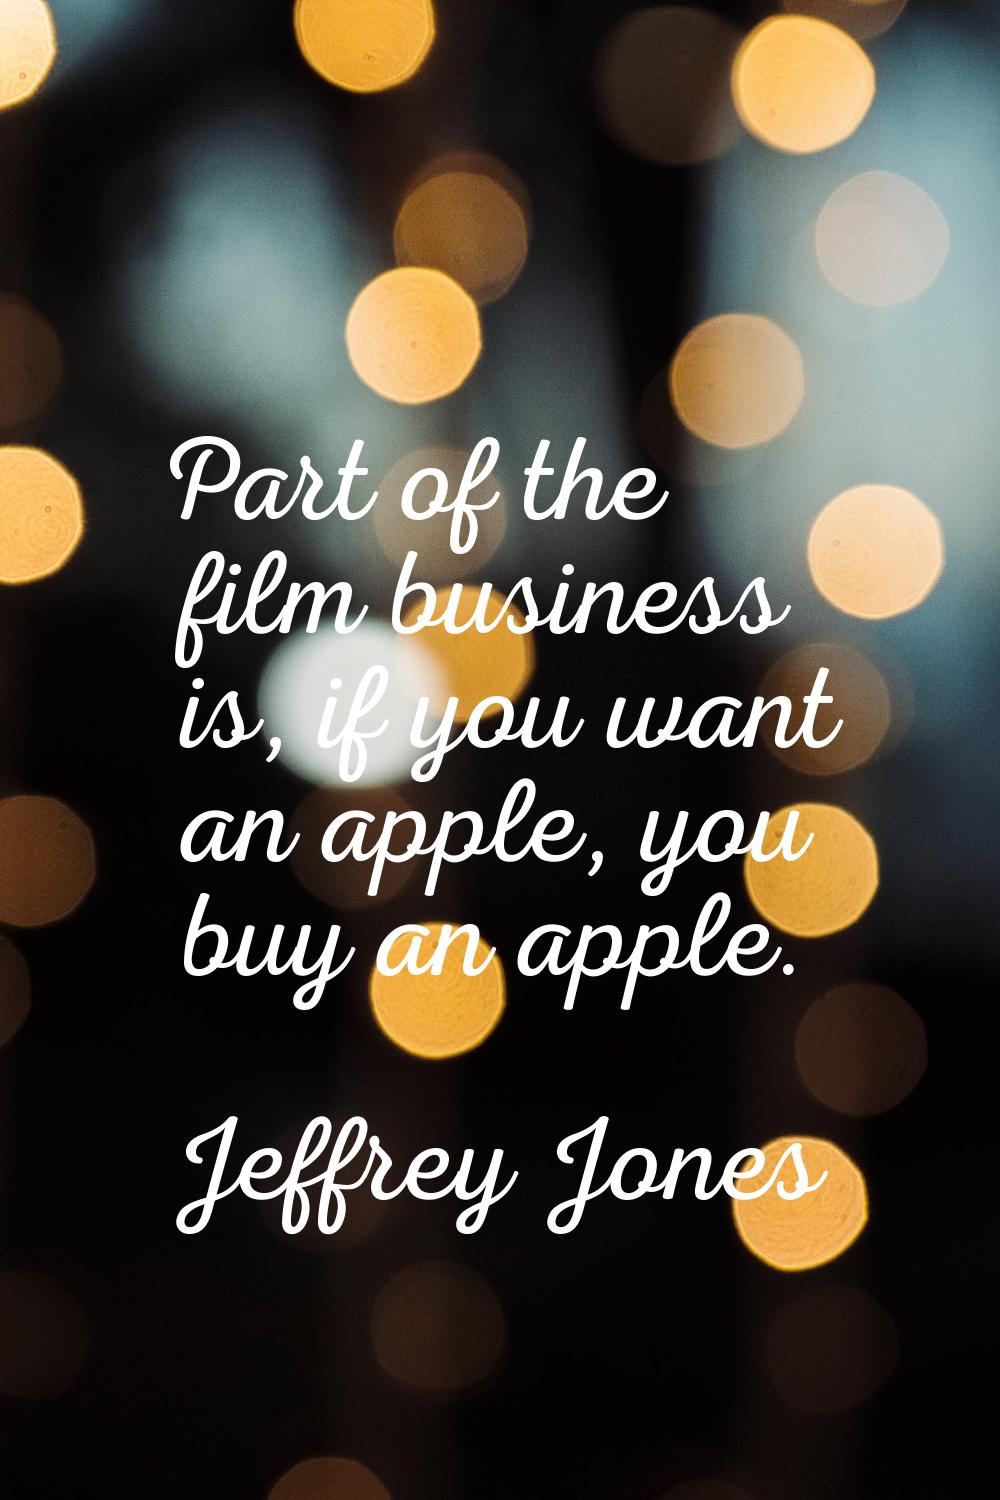 Part of the film business is, if you want an apple, you buy an apple.